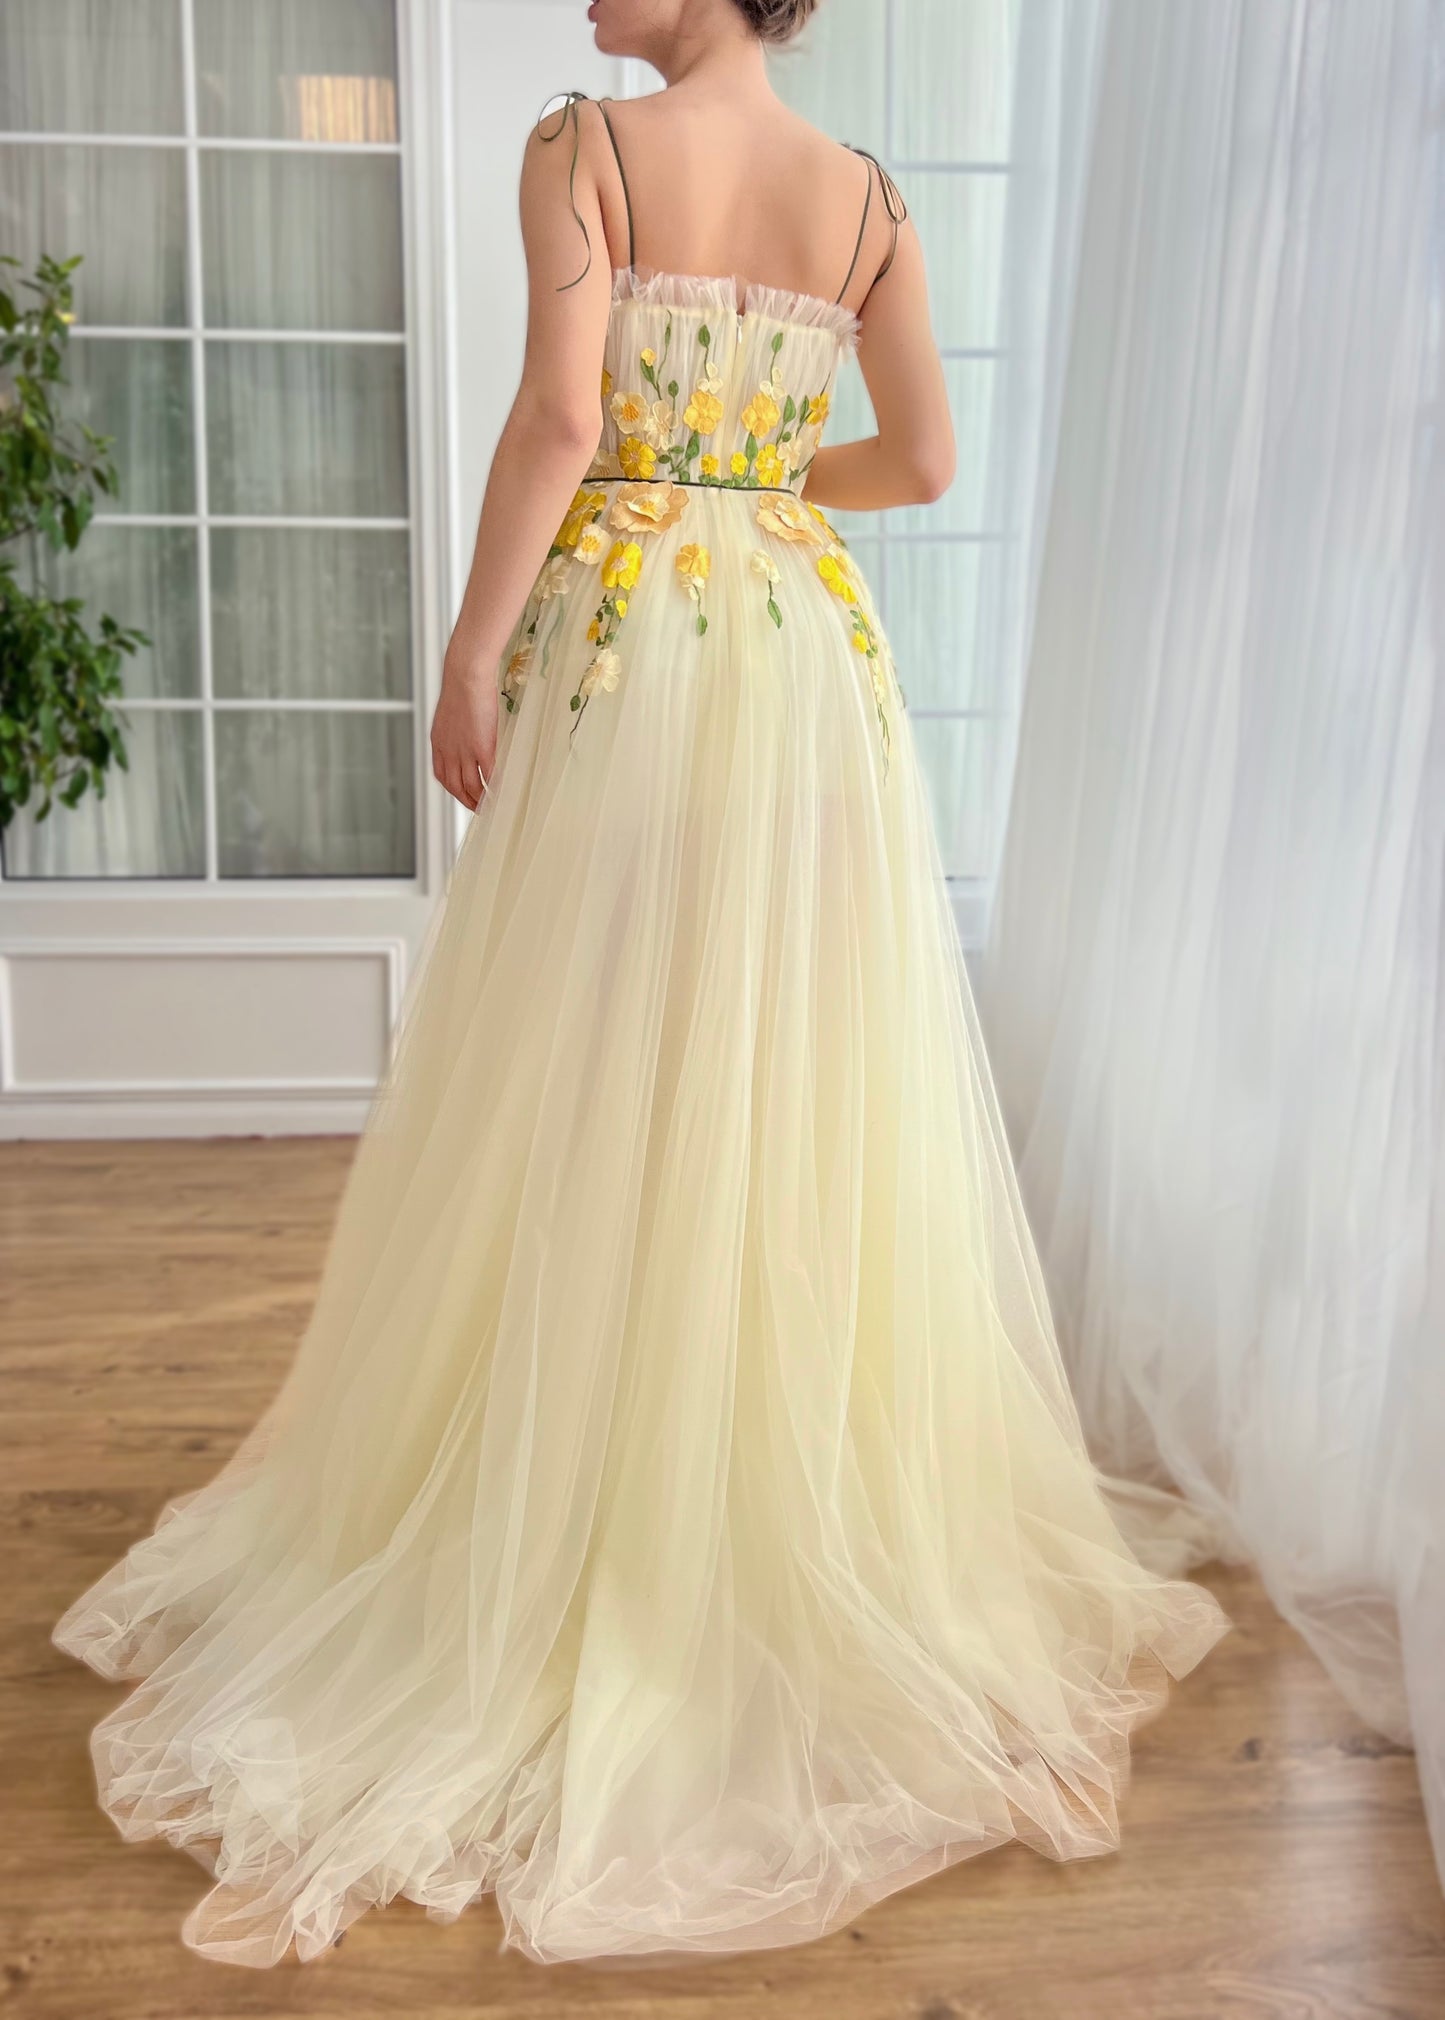 Yellow A-Line dress with spaghetti straps and embroidered flowers